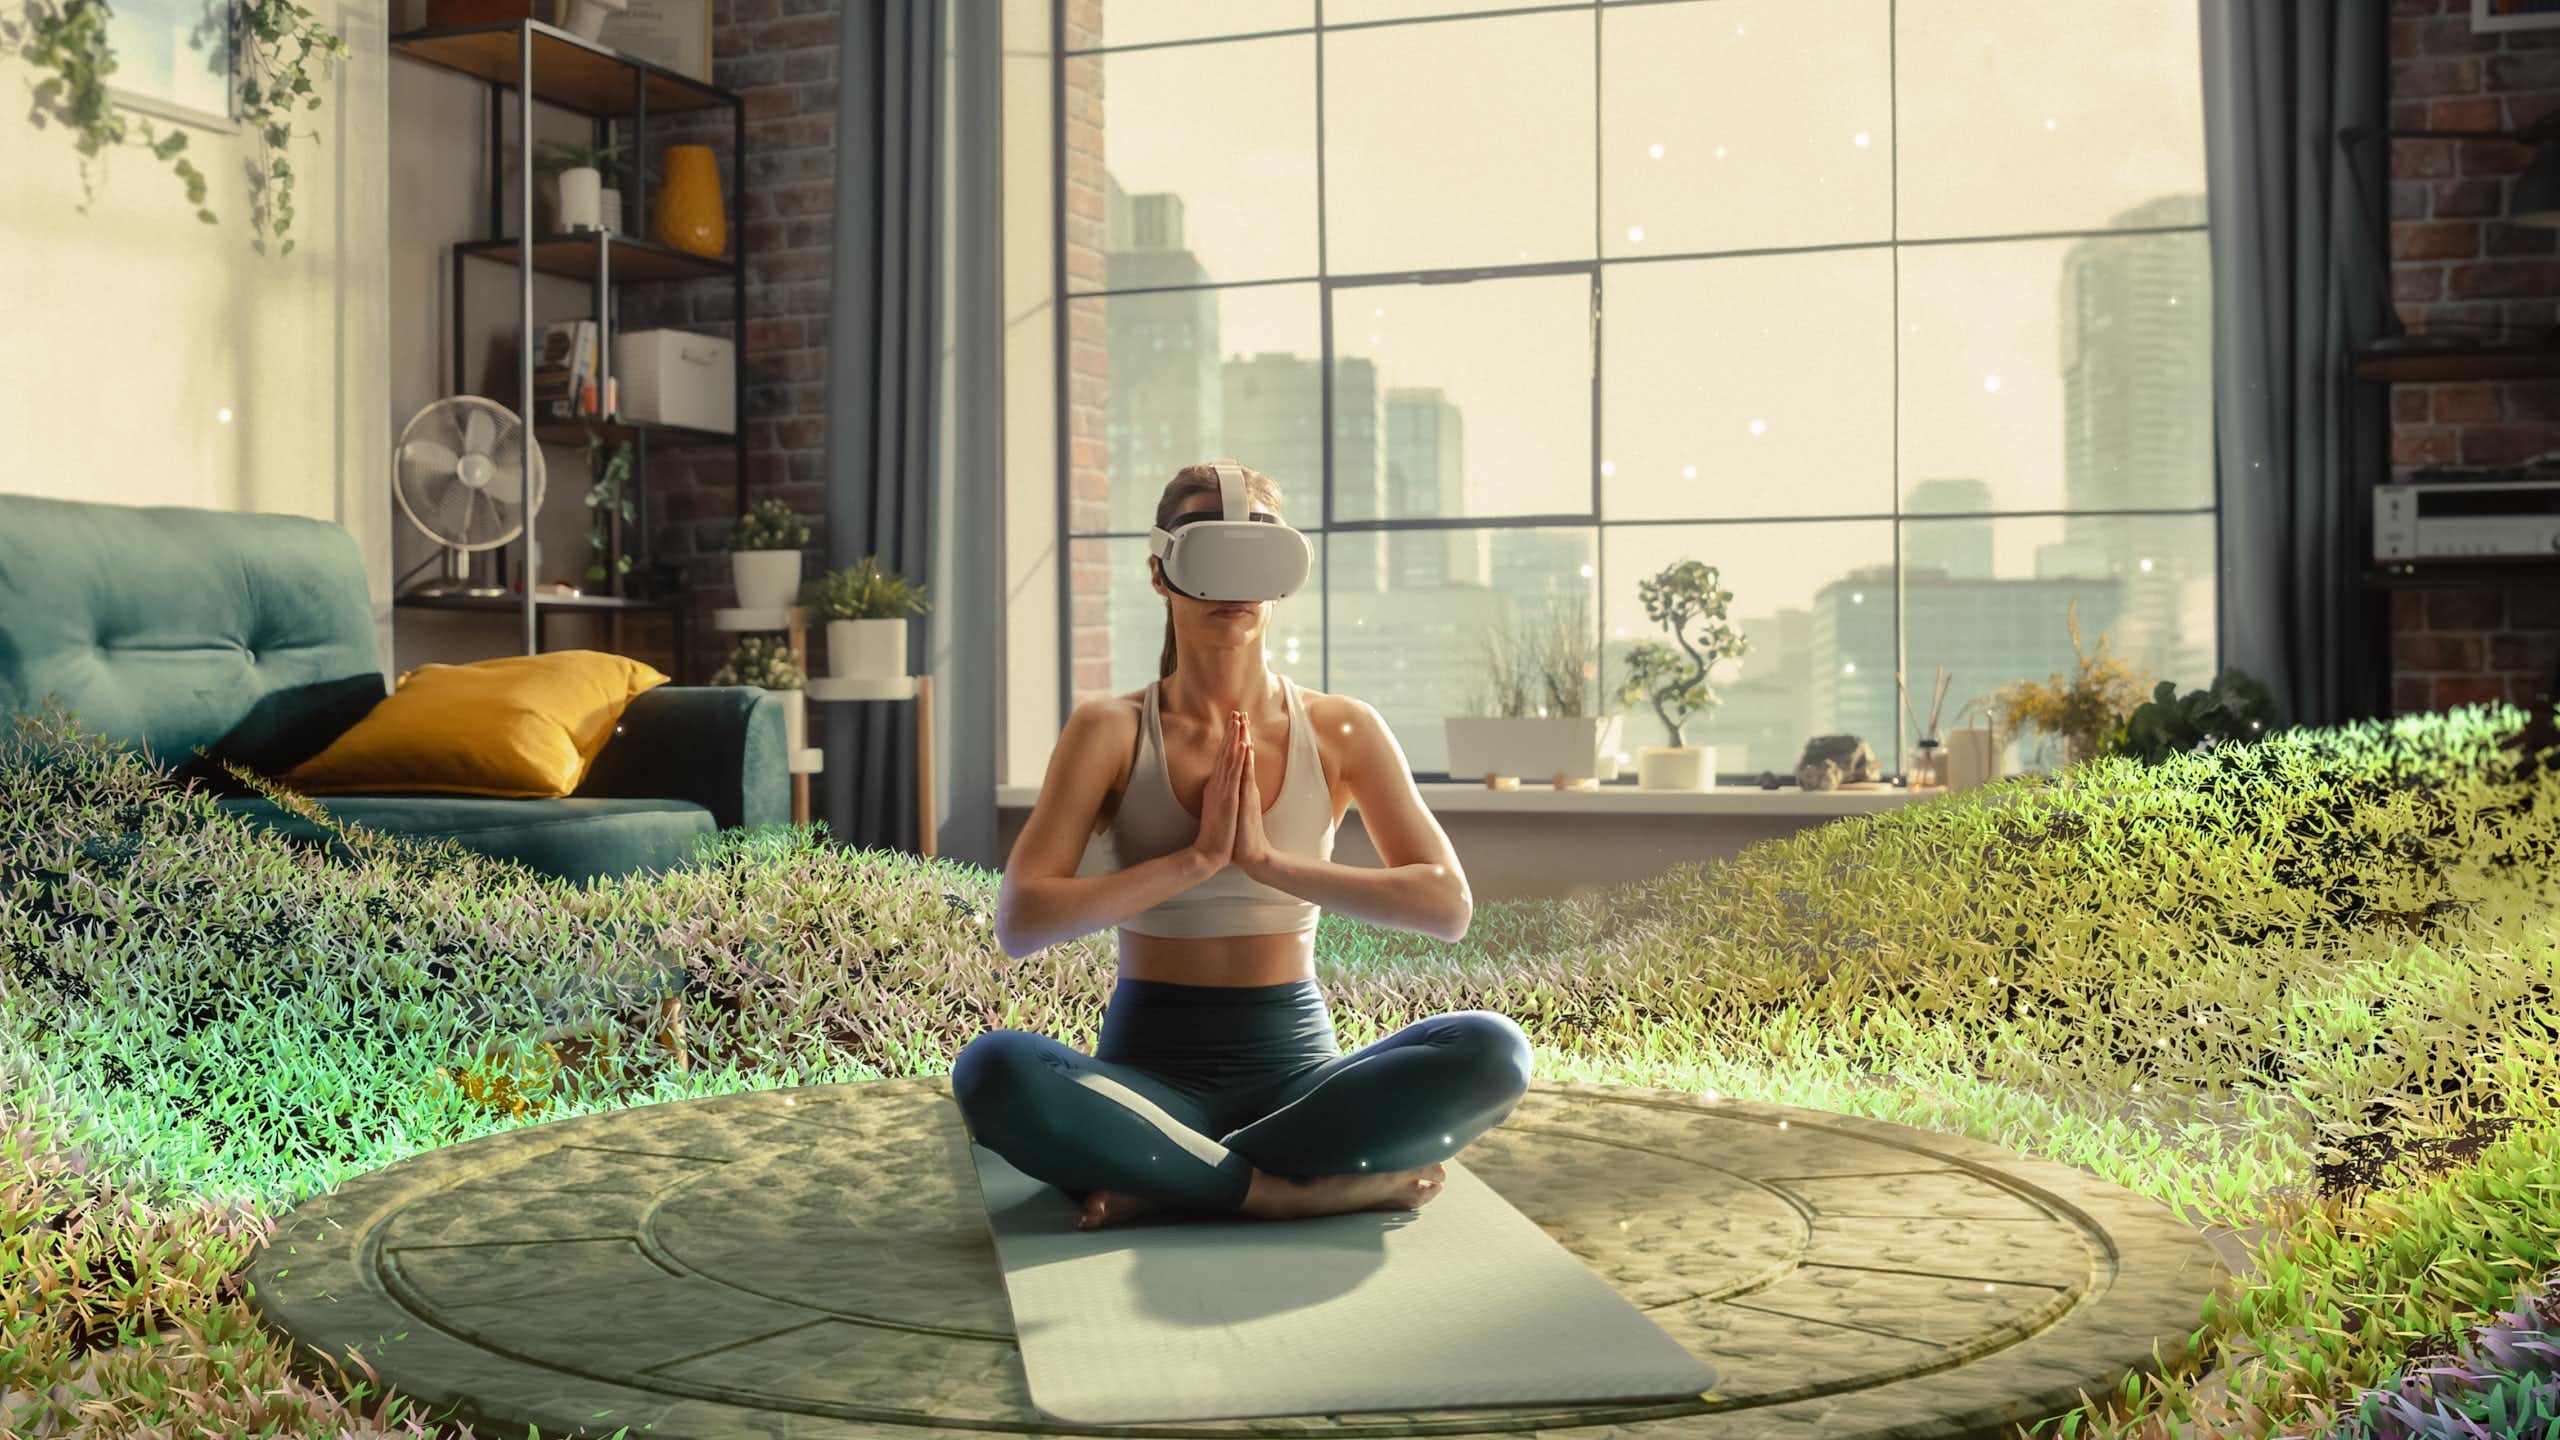 A woman wearing VR goggles places her hands together while sitting on the ground. Virtual greenery surrounds her. 